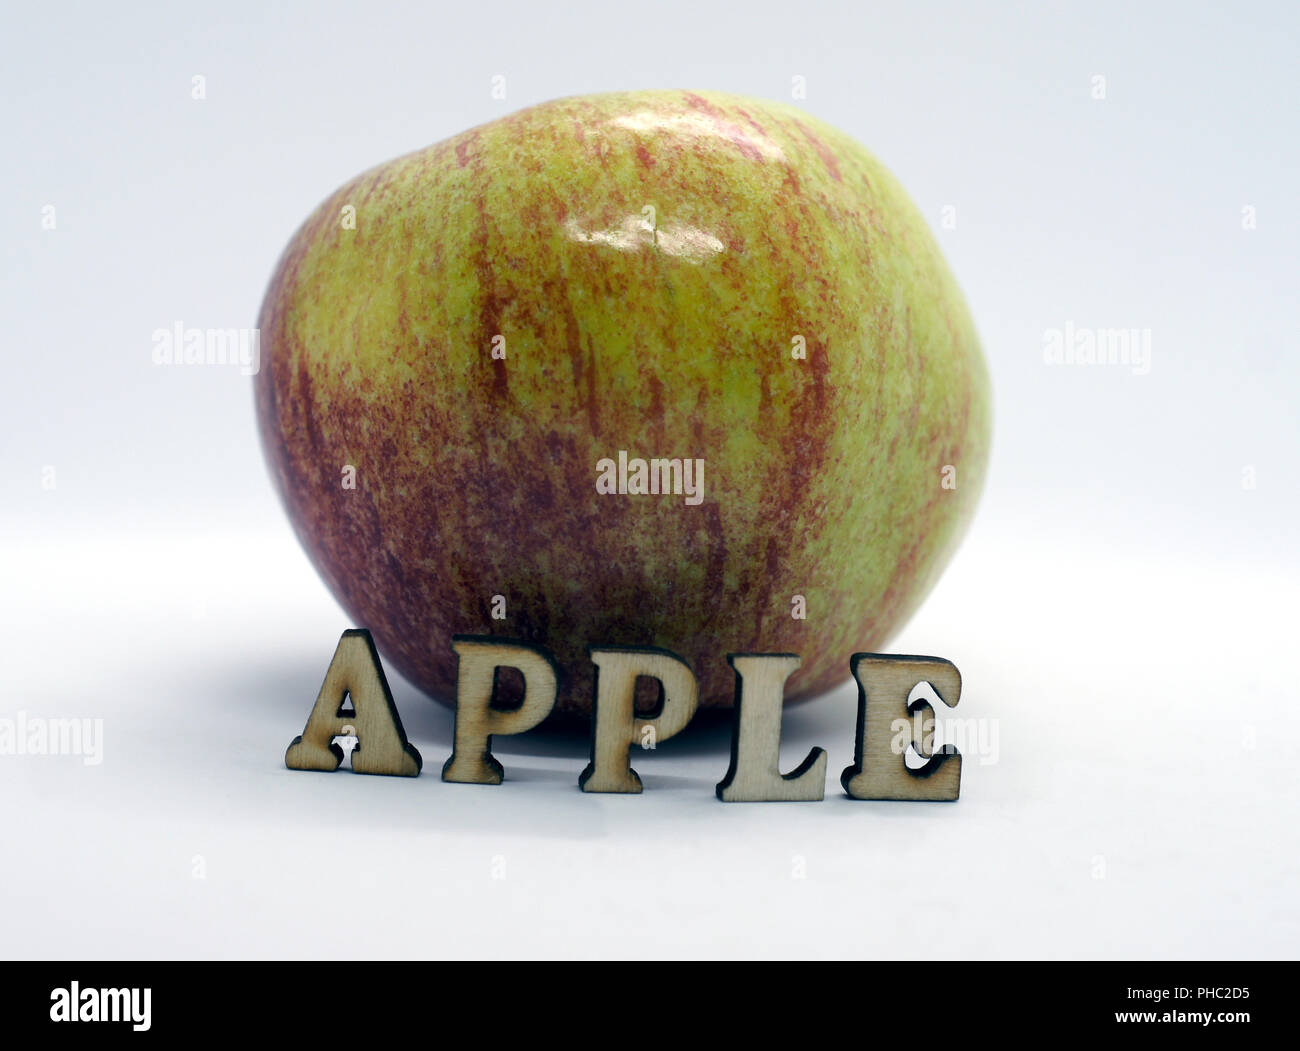 apple as fruit and in text Stock Photo